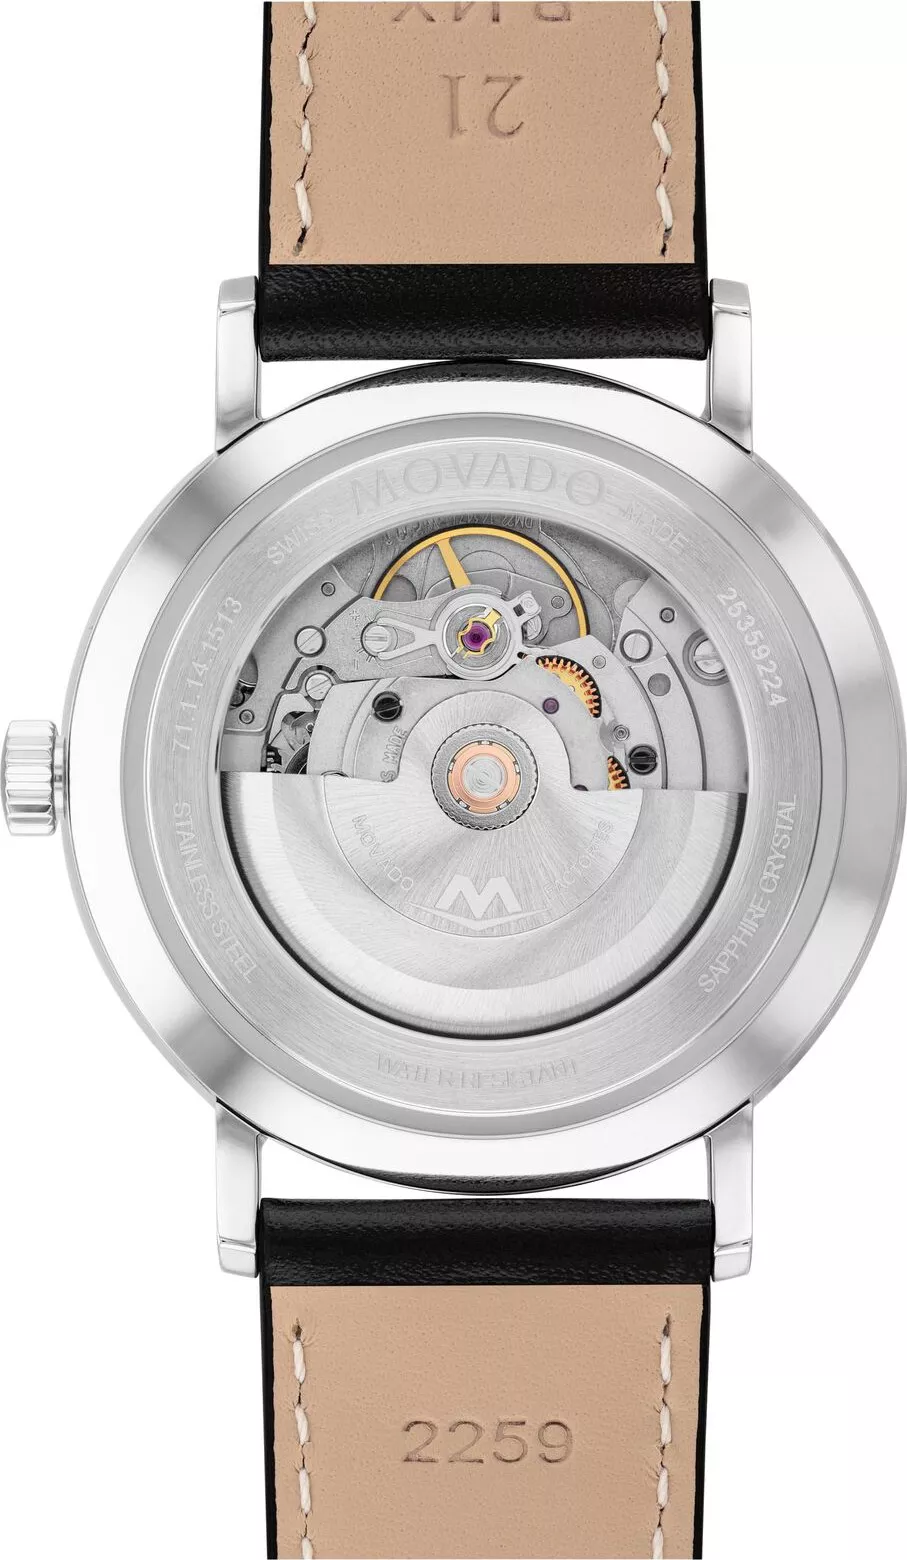 MOVADO SIGNATURE AUTOMATIC WATCH 40MM